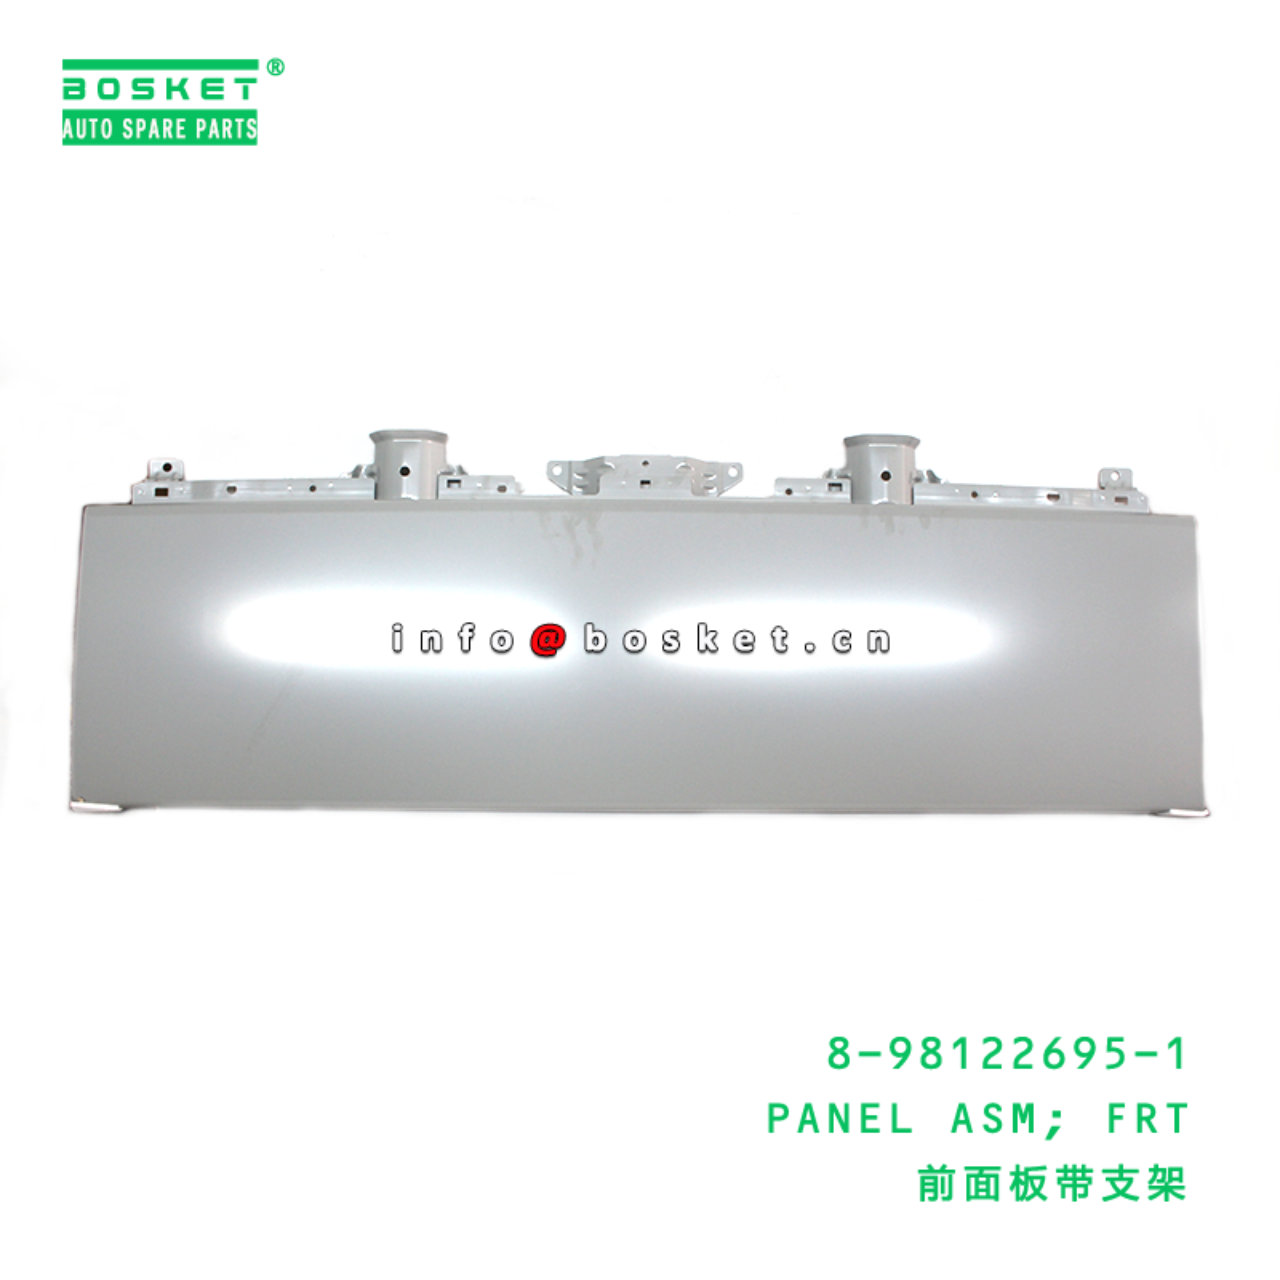 8-98122695-1 Front Panel Assembly 8981226951 Suitable for ISUZU NPR85 700P